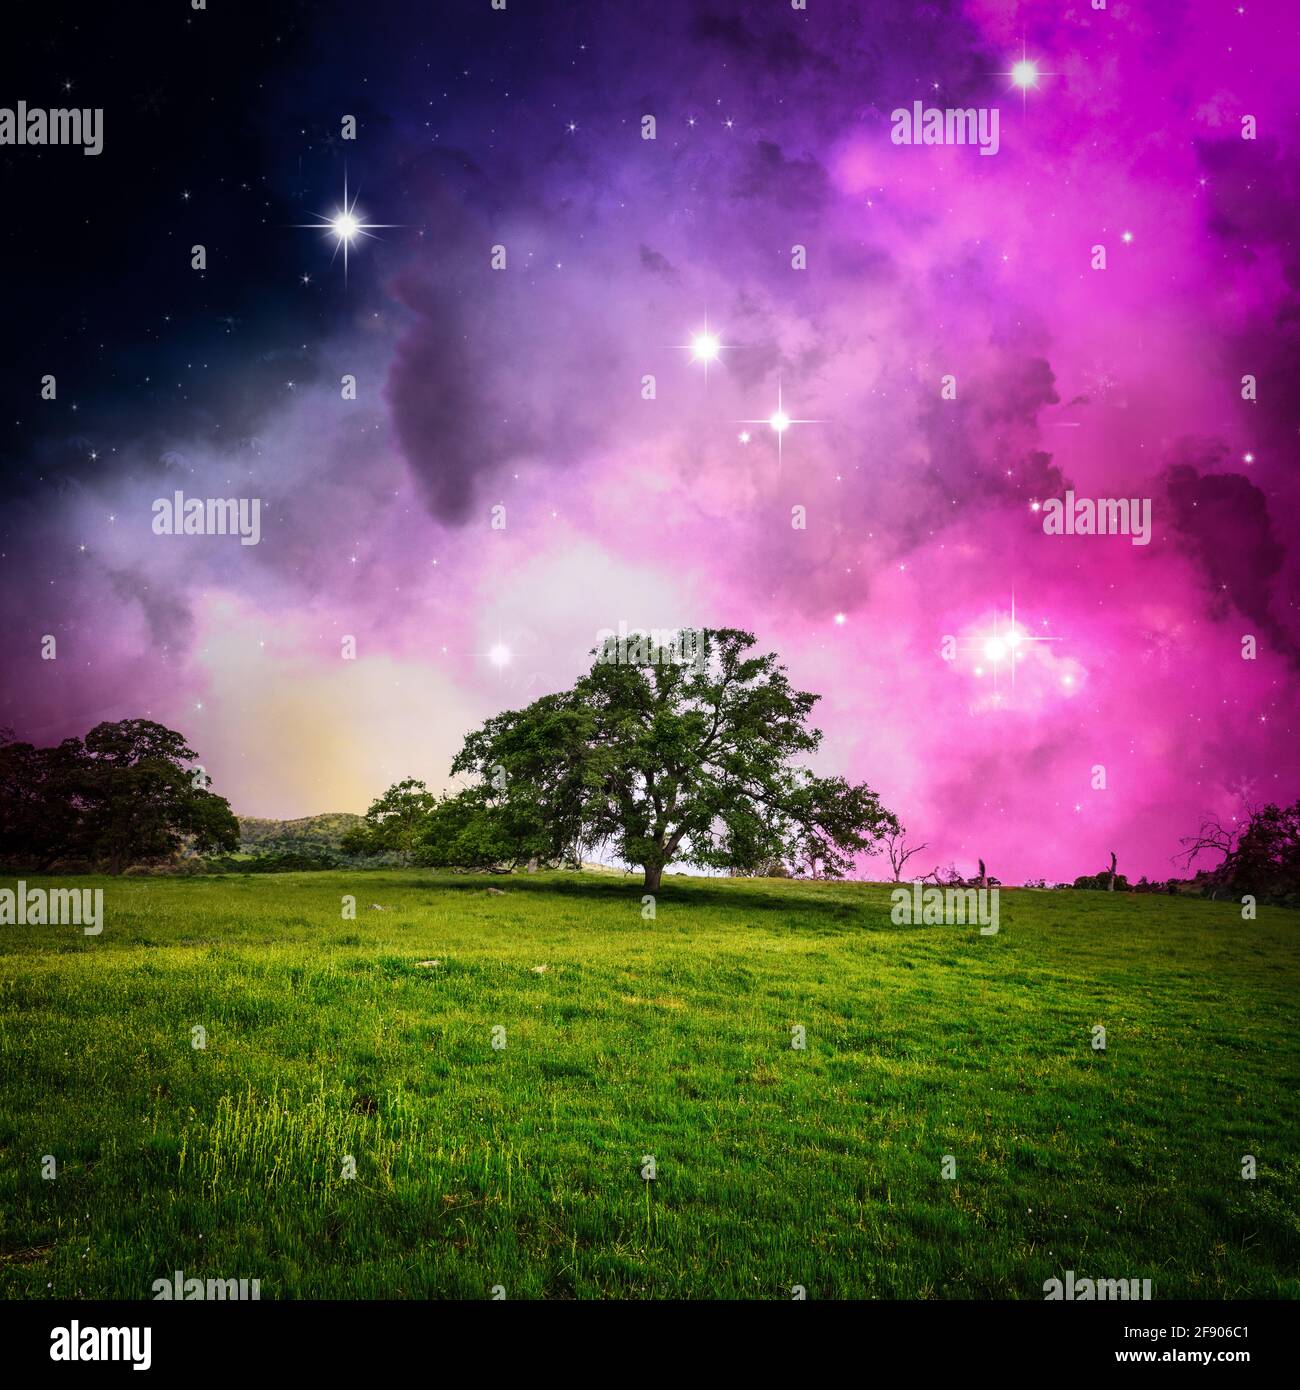 Magical purple night sky with stars and a rural landscape, USA Stock Photo